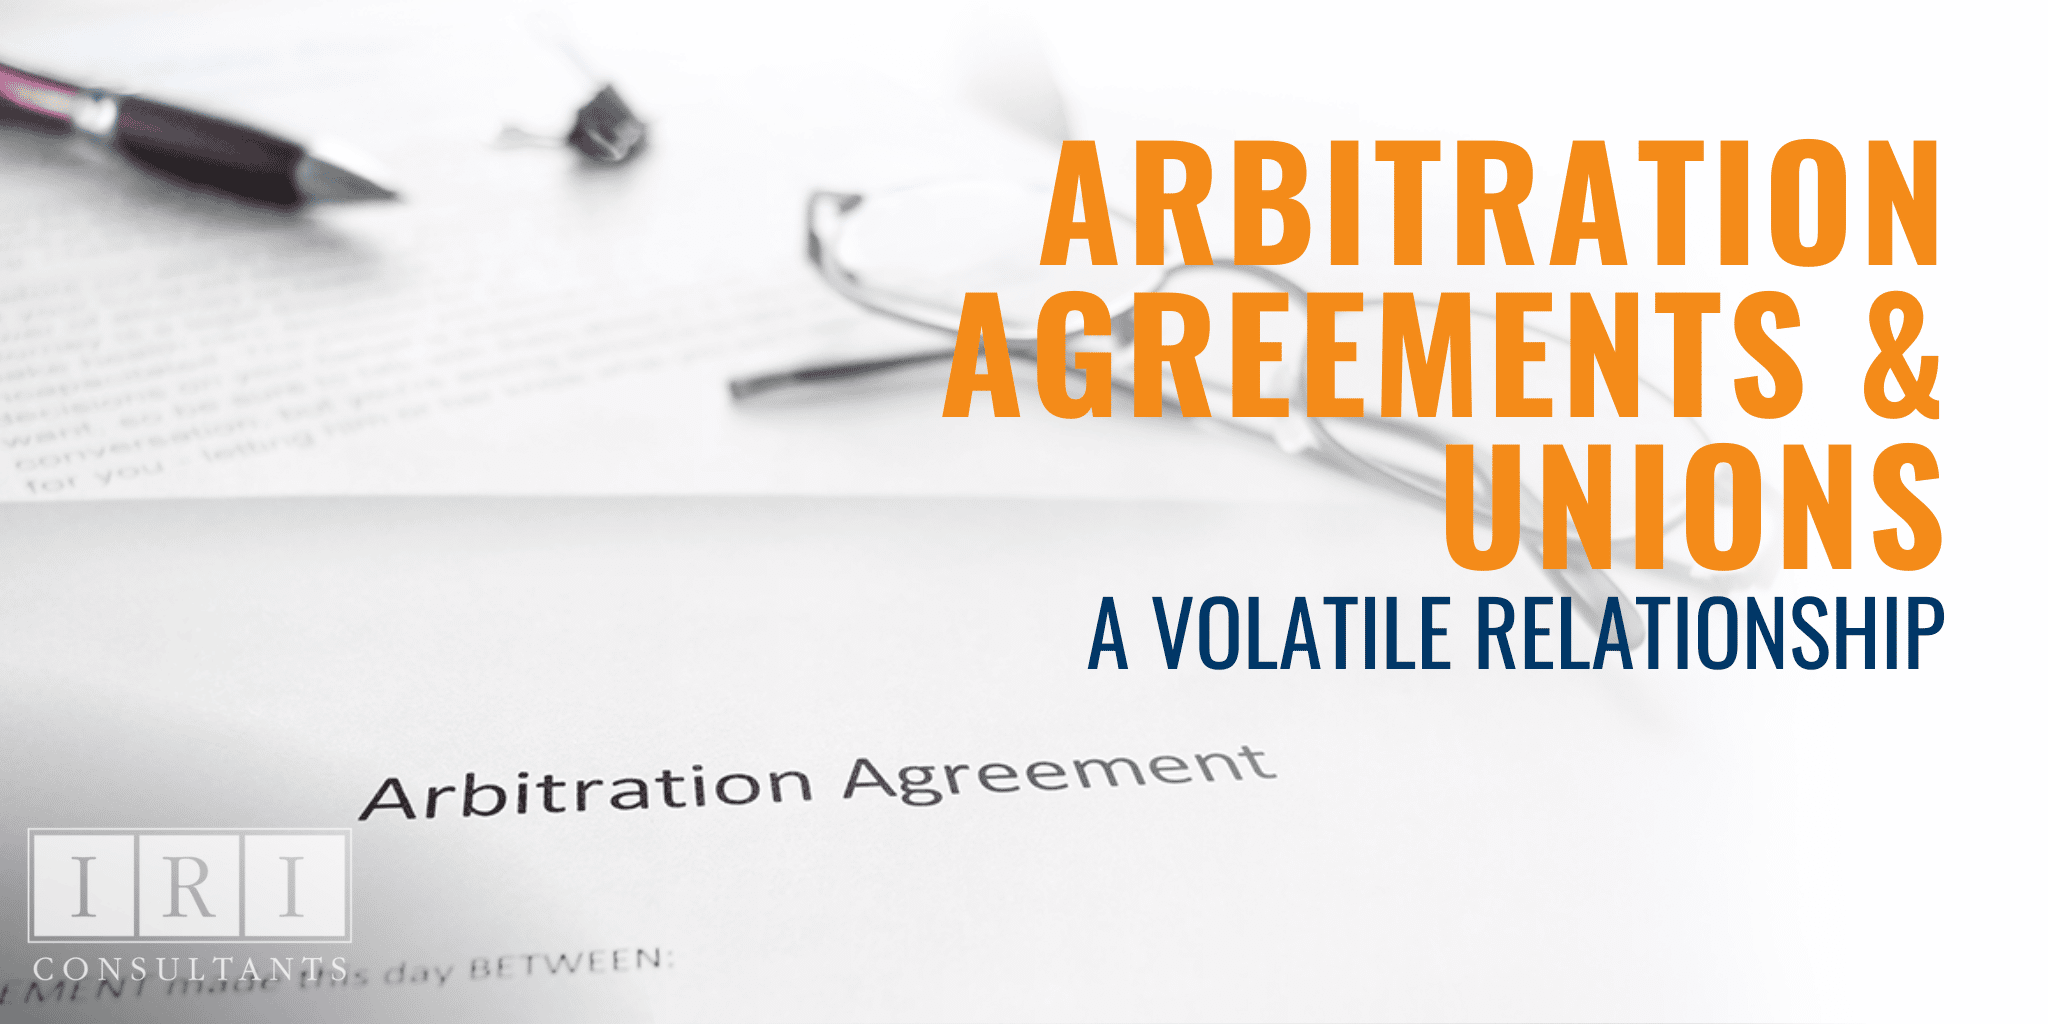 Arbitration Agreements & Unions A Volatile Relationship